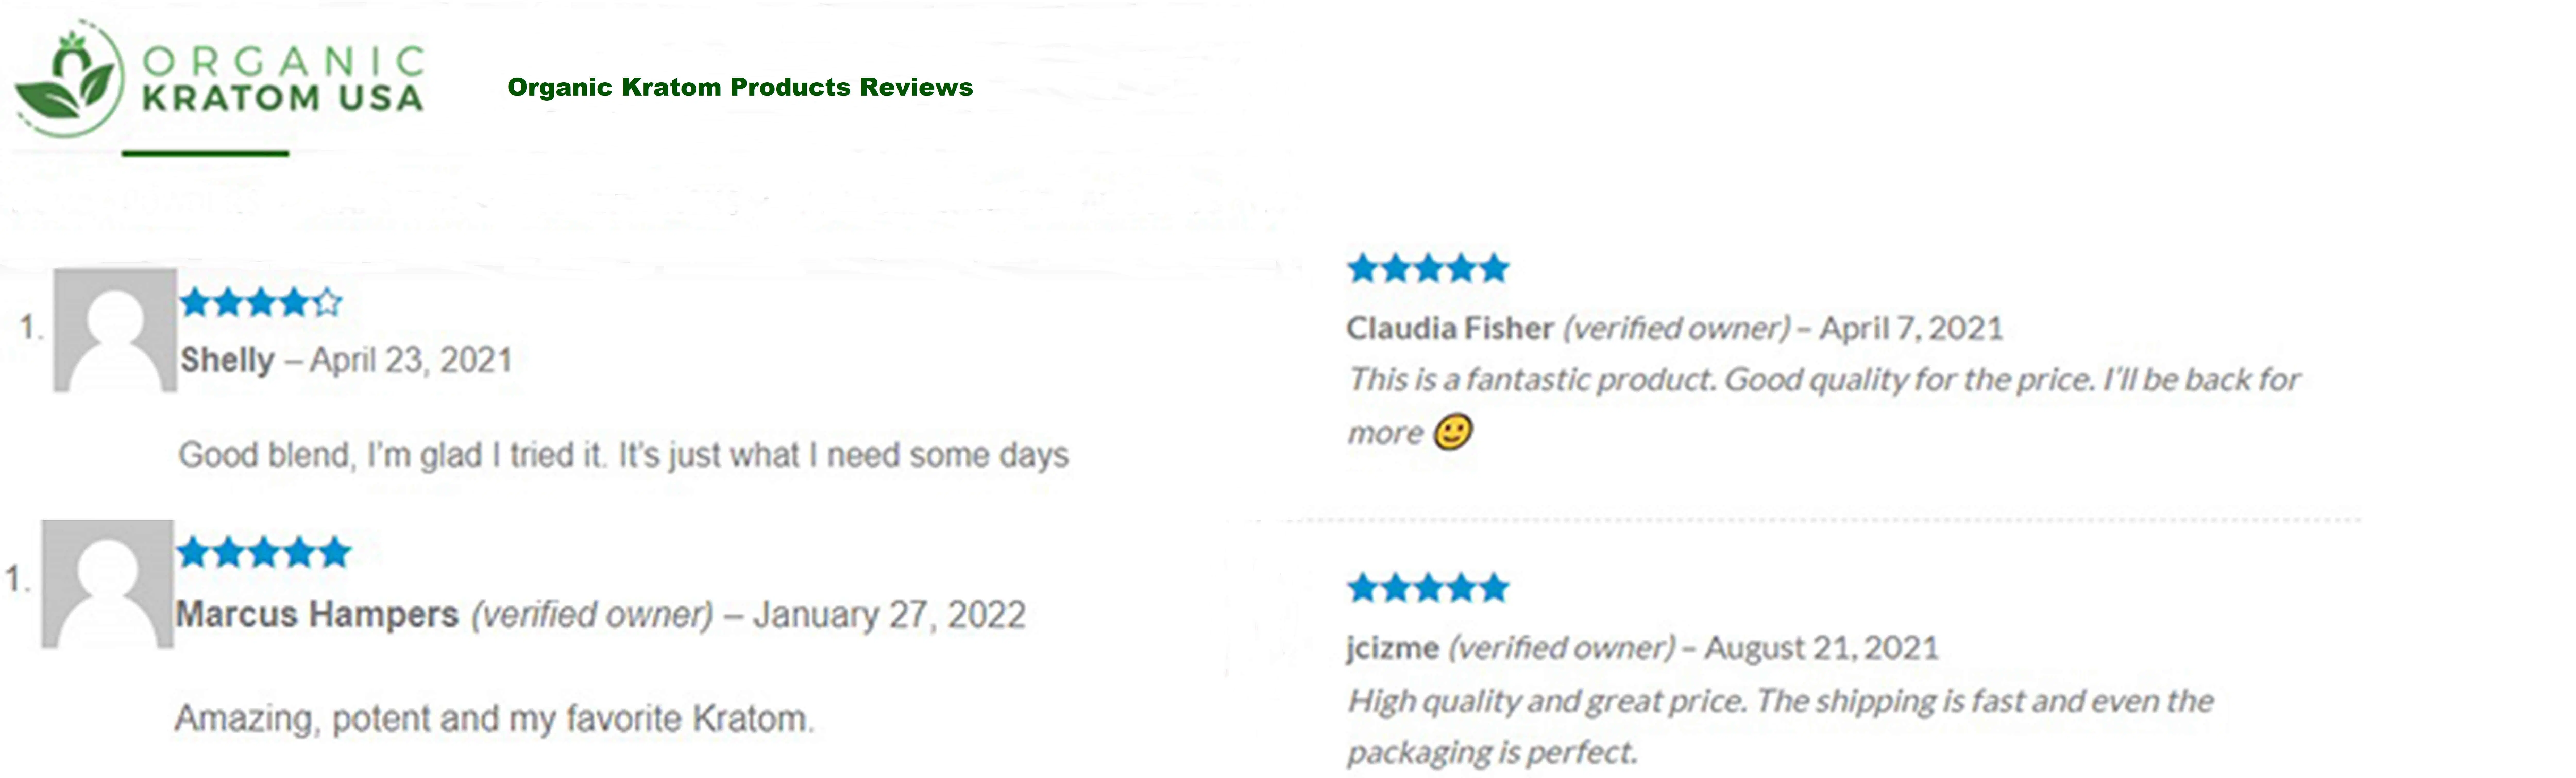 image of organic kratom products reviews